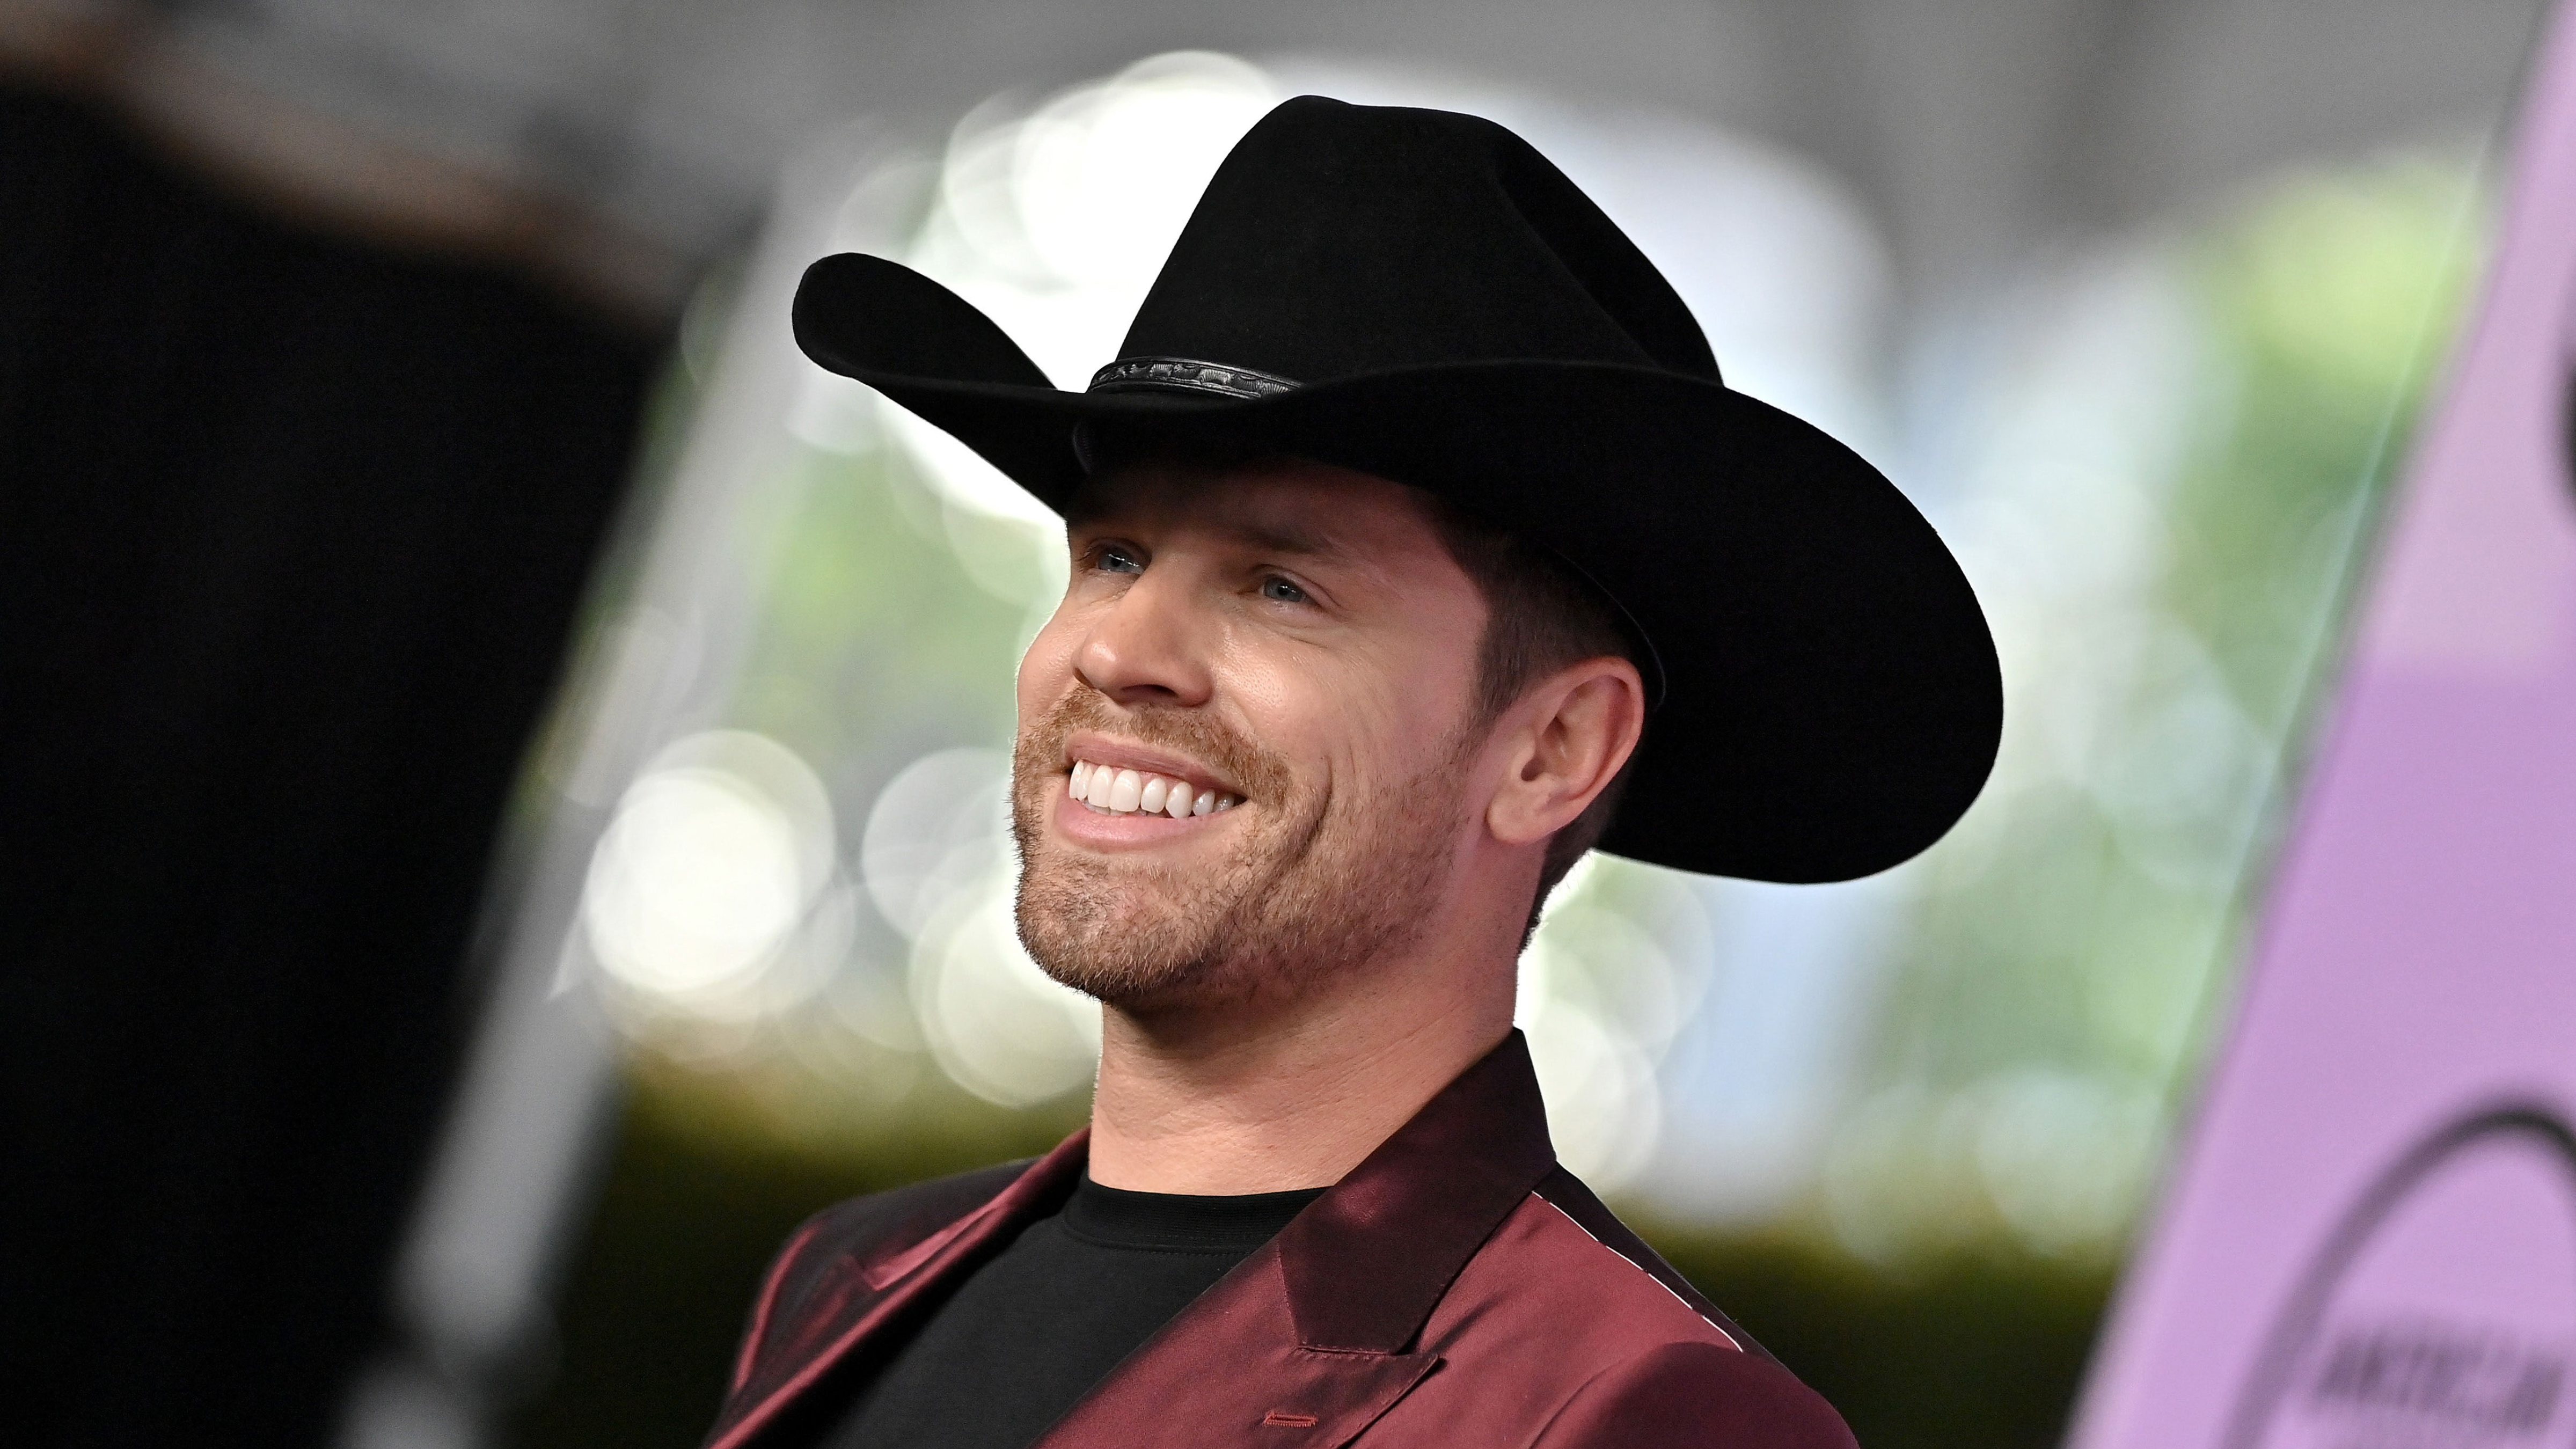 LOS ANGELES, CALIFORNIA - NOVEMBER 20: (EDITORIAL USE ONLY) Dustin Lynch attends the 2022 American Music Awards at Microsoft Theater on November 20, 2022 in Los Angeles, California.